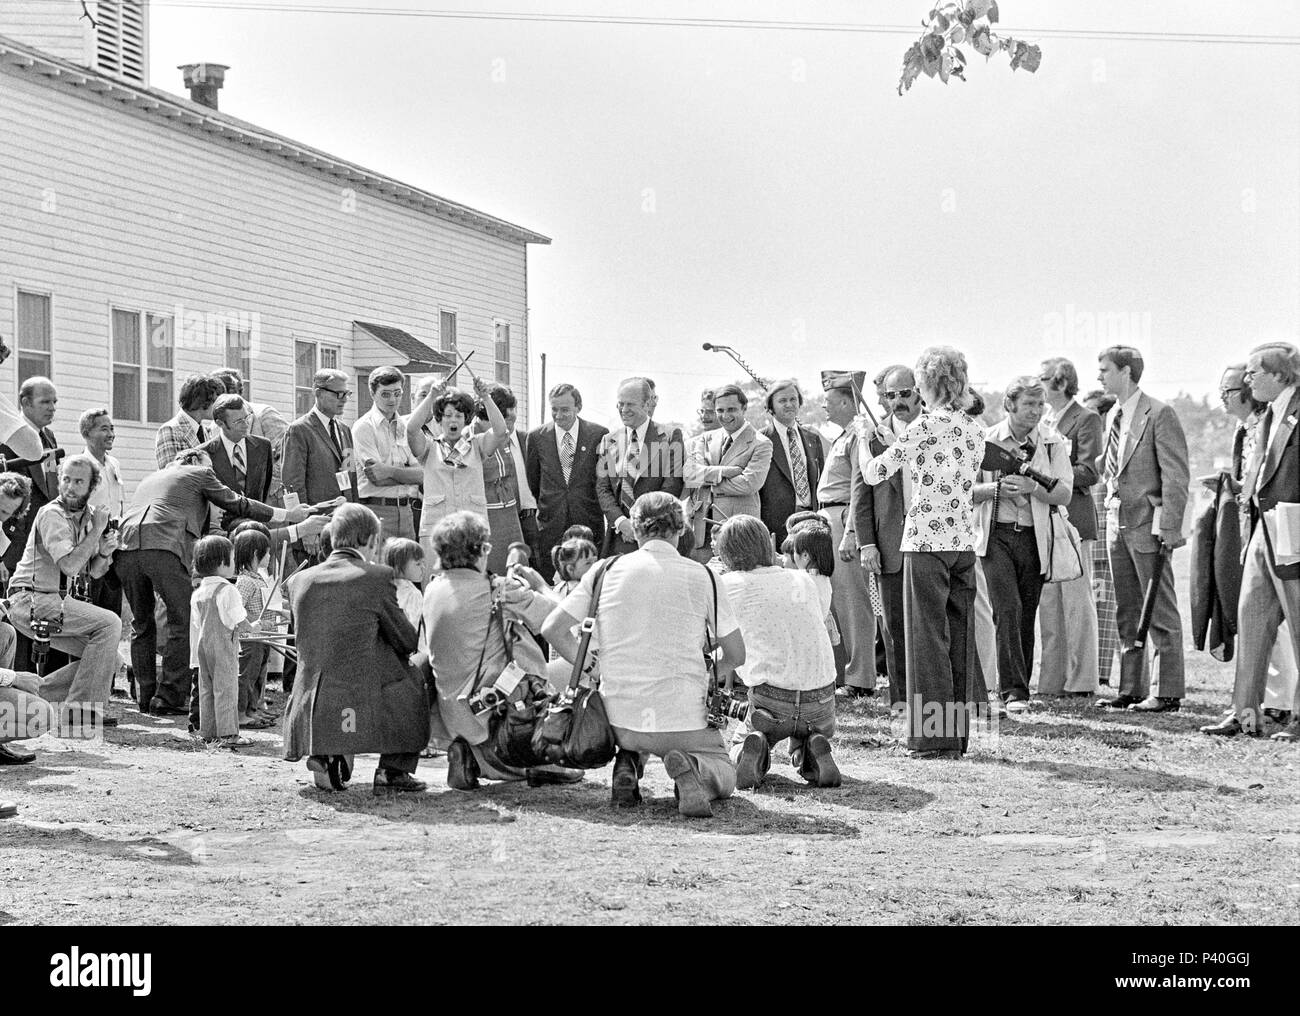 FORT SMITH, AR, USA - AUGUST 10, 1975 -- President Gerald Ford watches as a musical ensemble of very young Vietnamese refugee children perform for him. Photographers and journalists surround the performance.  To the far left (looking back over his right shoulder) is Official White House Photographer David Hume Kennerly.  Kennerly had previously won the Pulizer Prize for his photographic coverage of the Vietnam War. Stock Photo